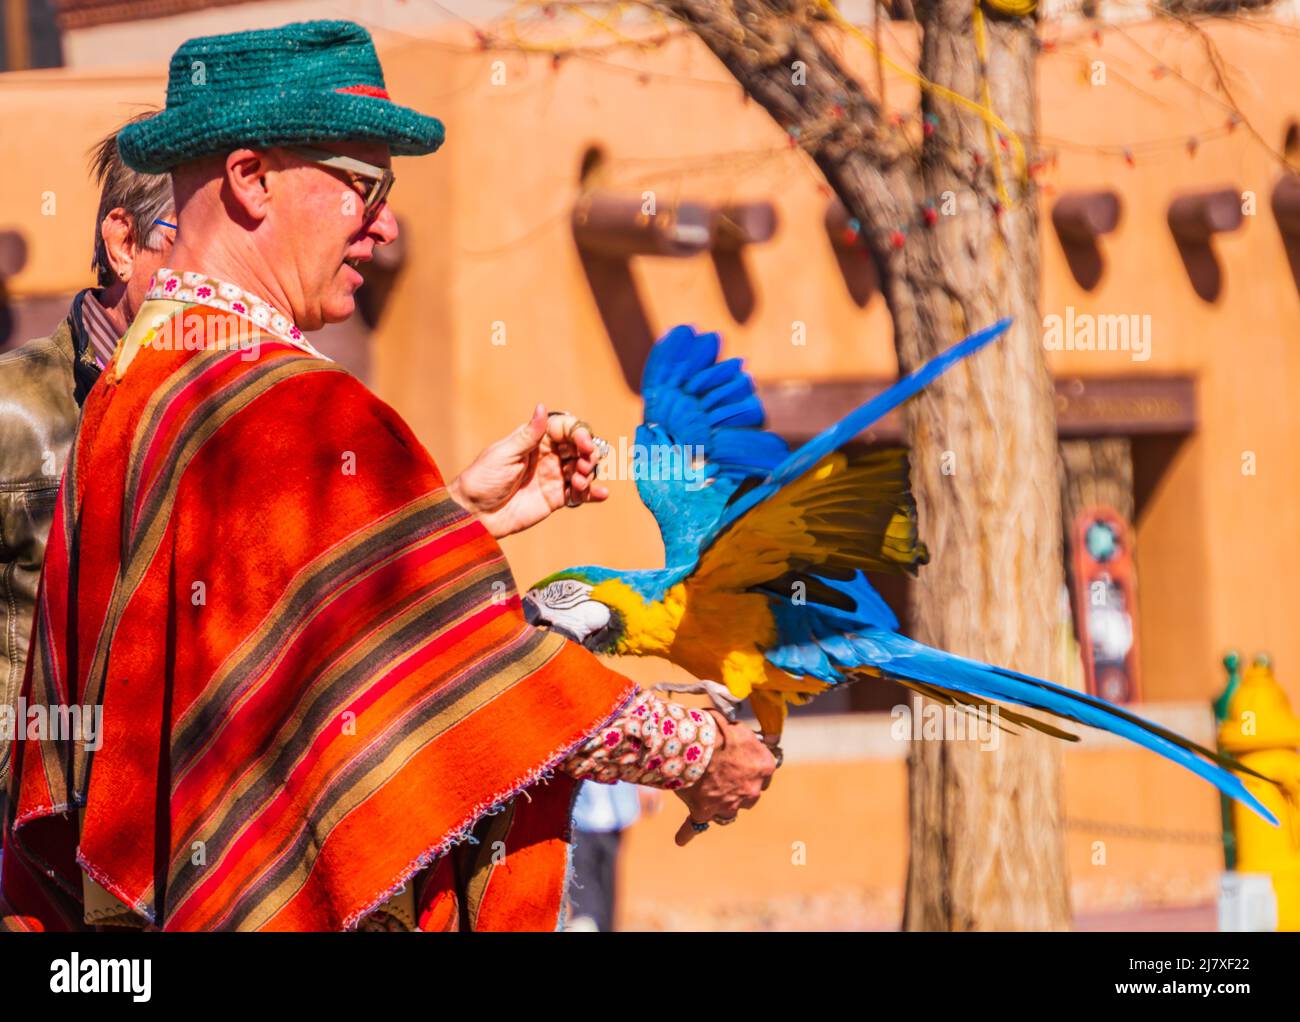 Santa Fe, New Mexico/USA- March 2, 2022: man taking his pet parrot for a walk in the Plaza Stock Photo